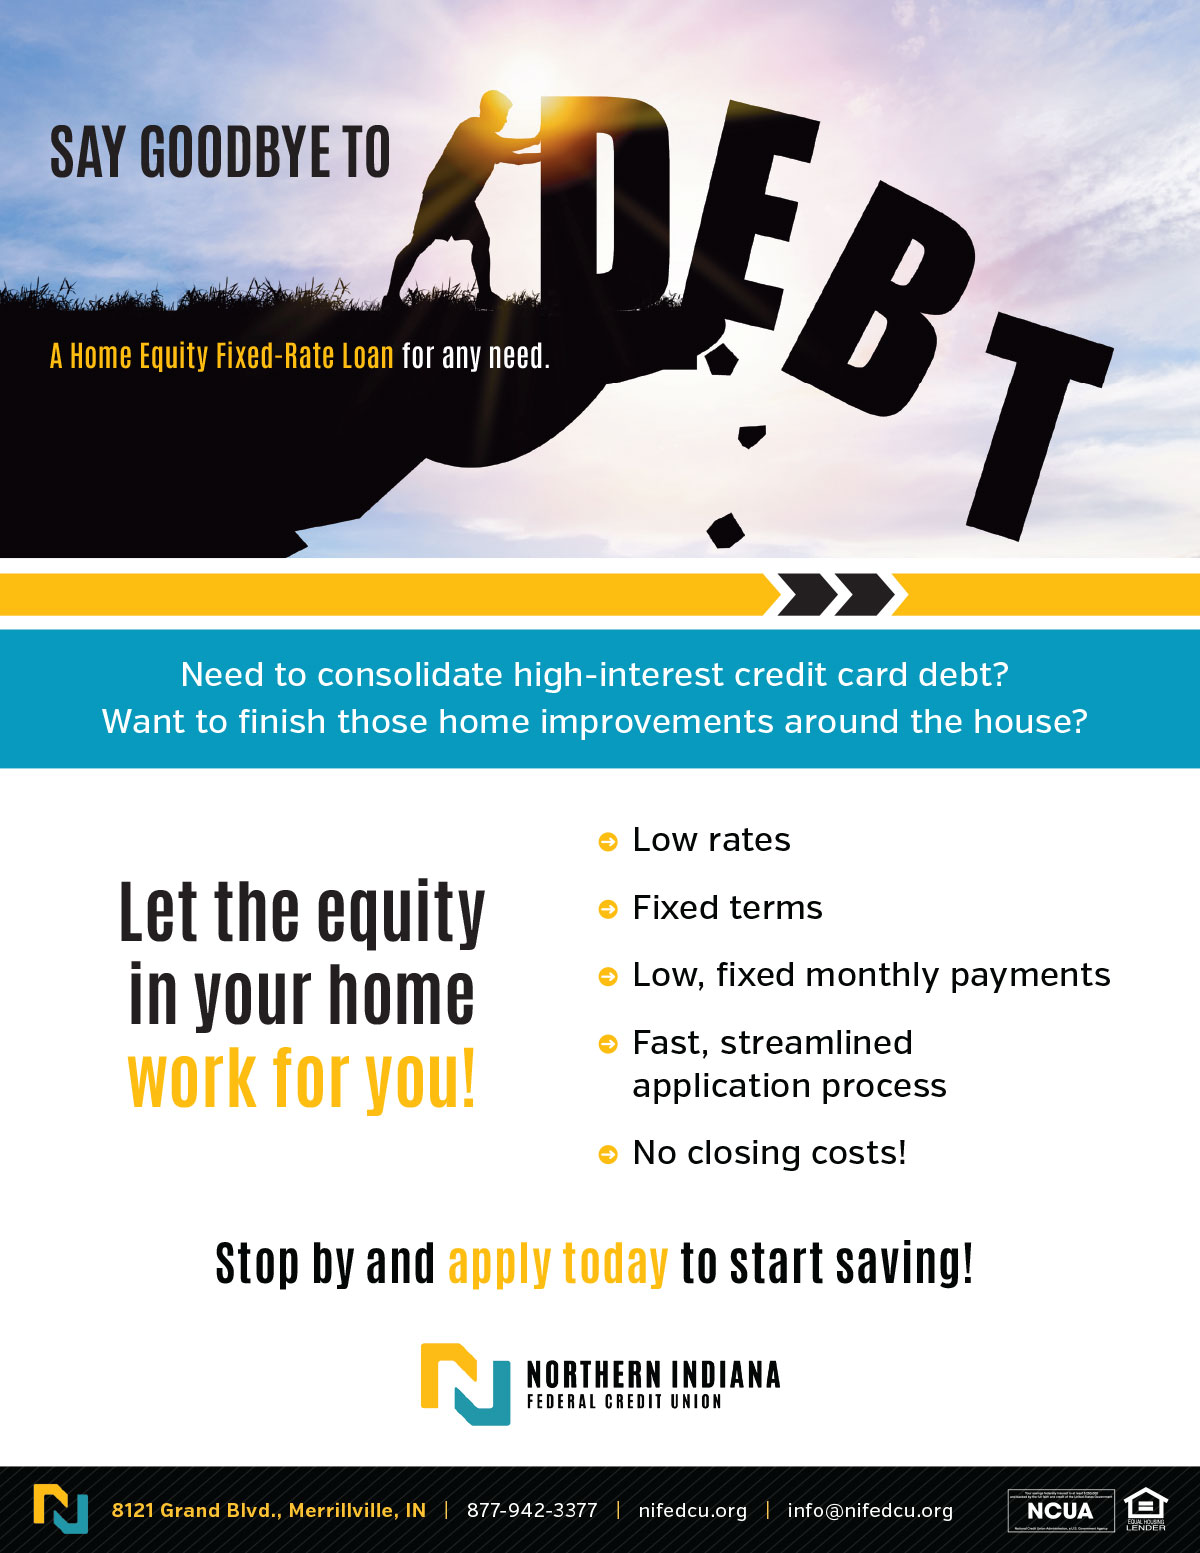 Say Goodbye to Debt. A home equity loan for any need. Stop by and apply today to start saving! Please call 877-942-3377 for more information.